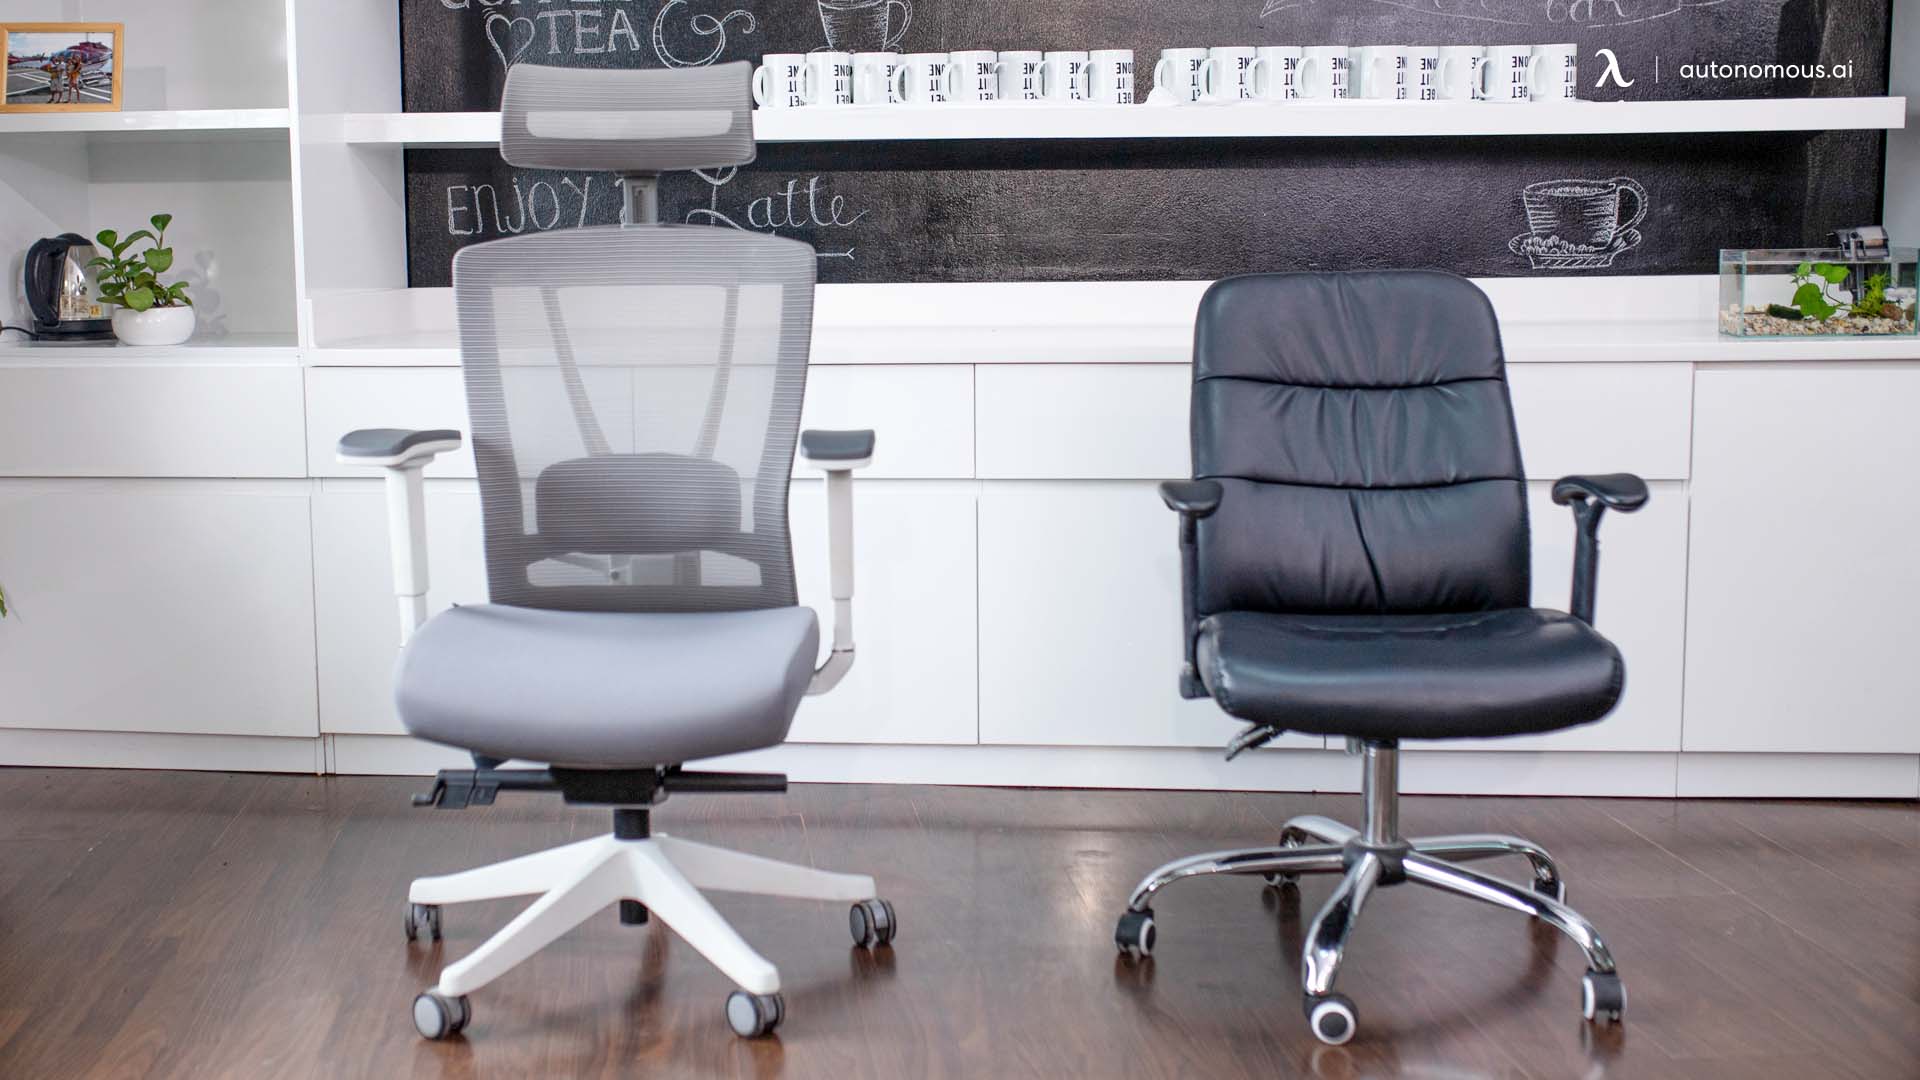 What to Consider When Buying a Used Office Chair